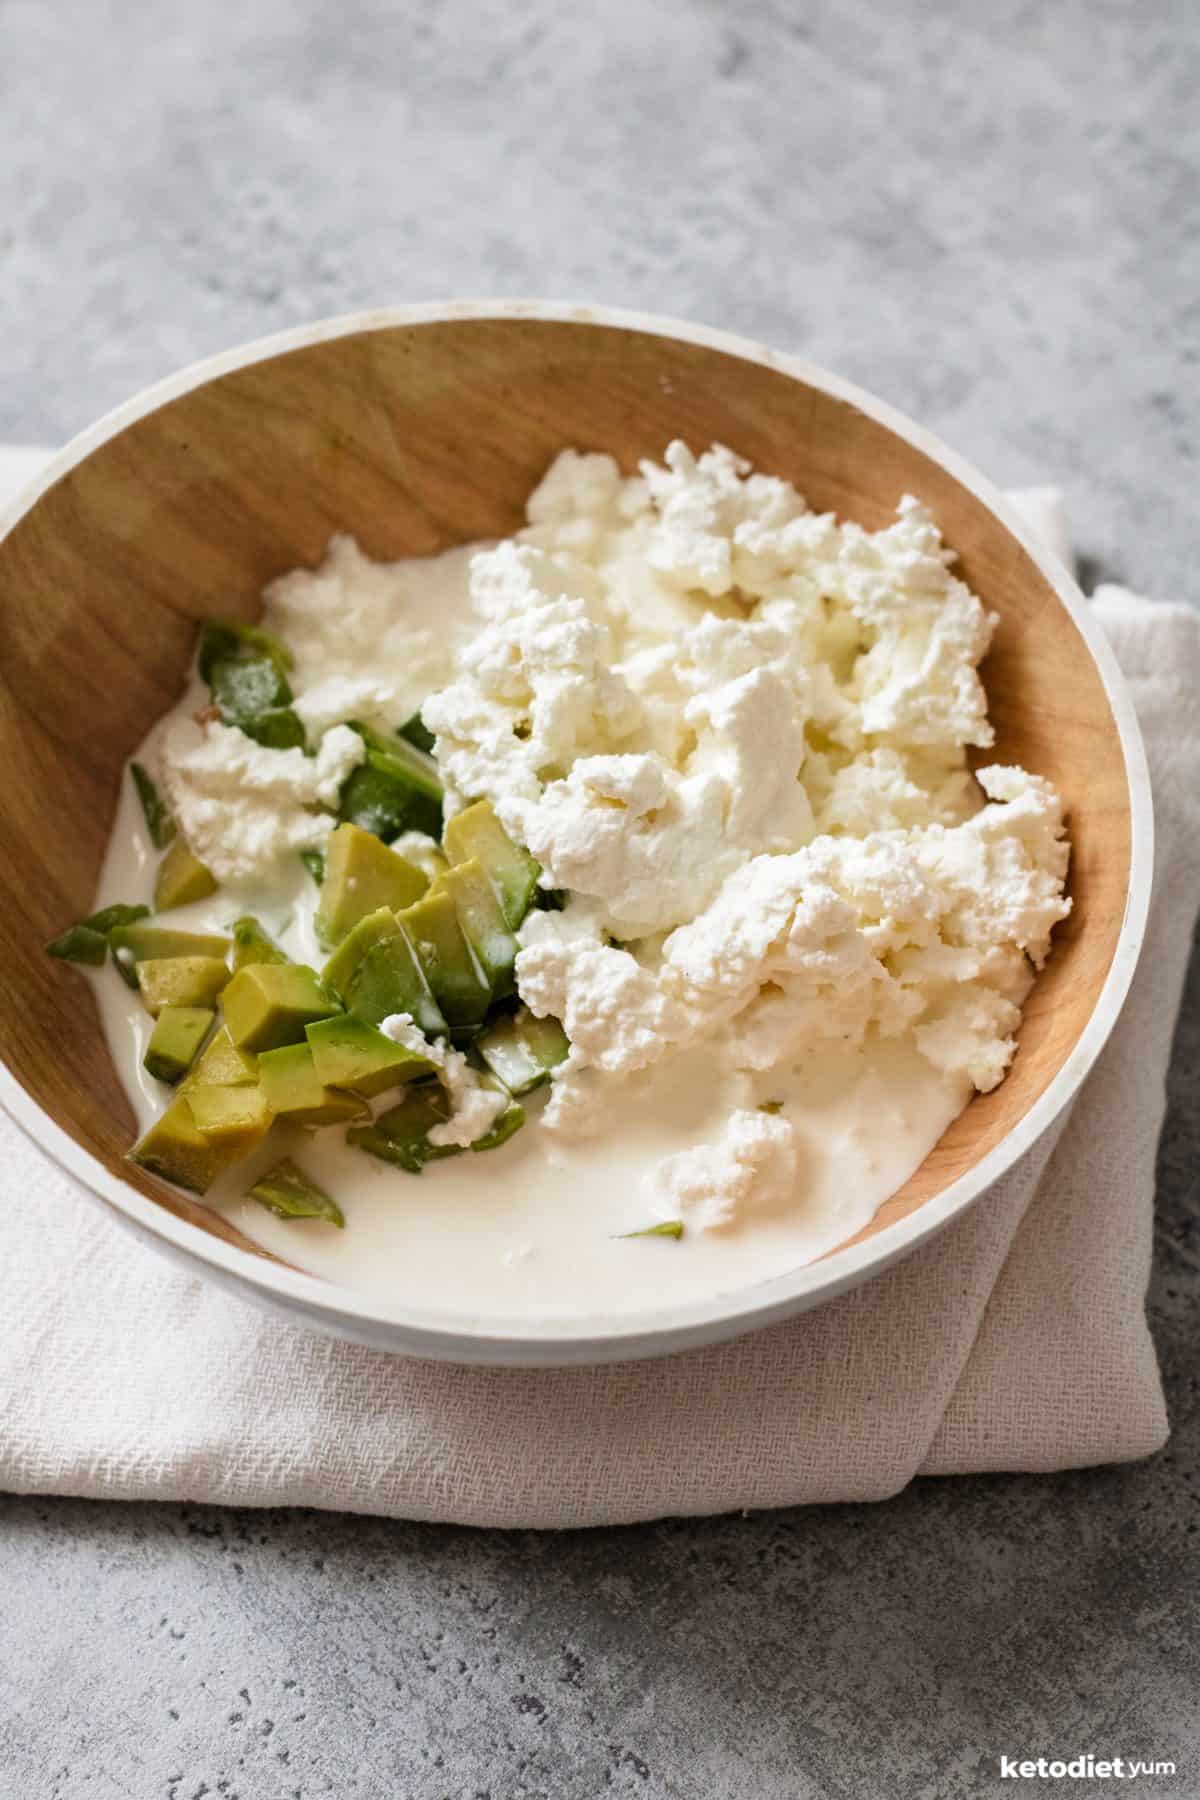 Sour cream, goat cheese and diced avocado in a bowl